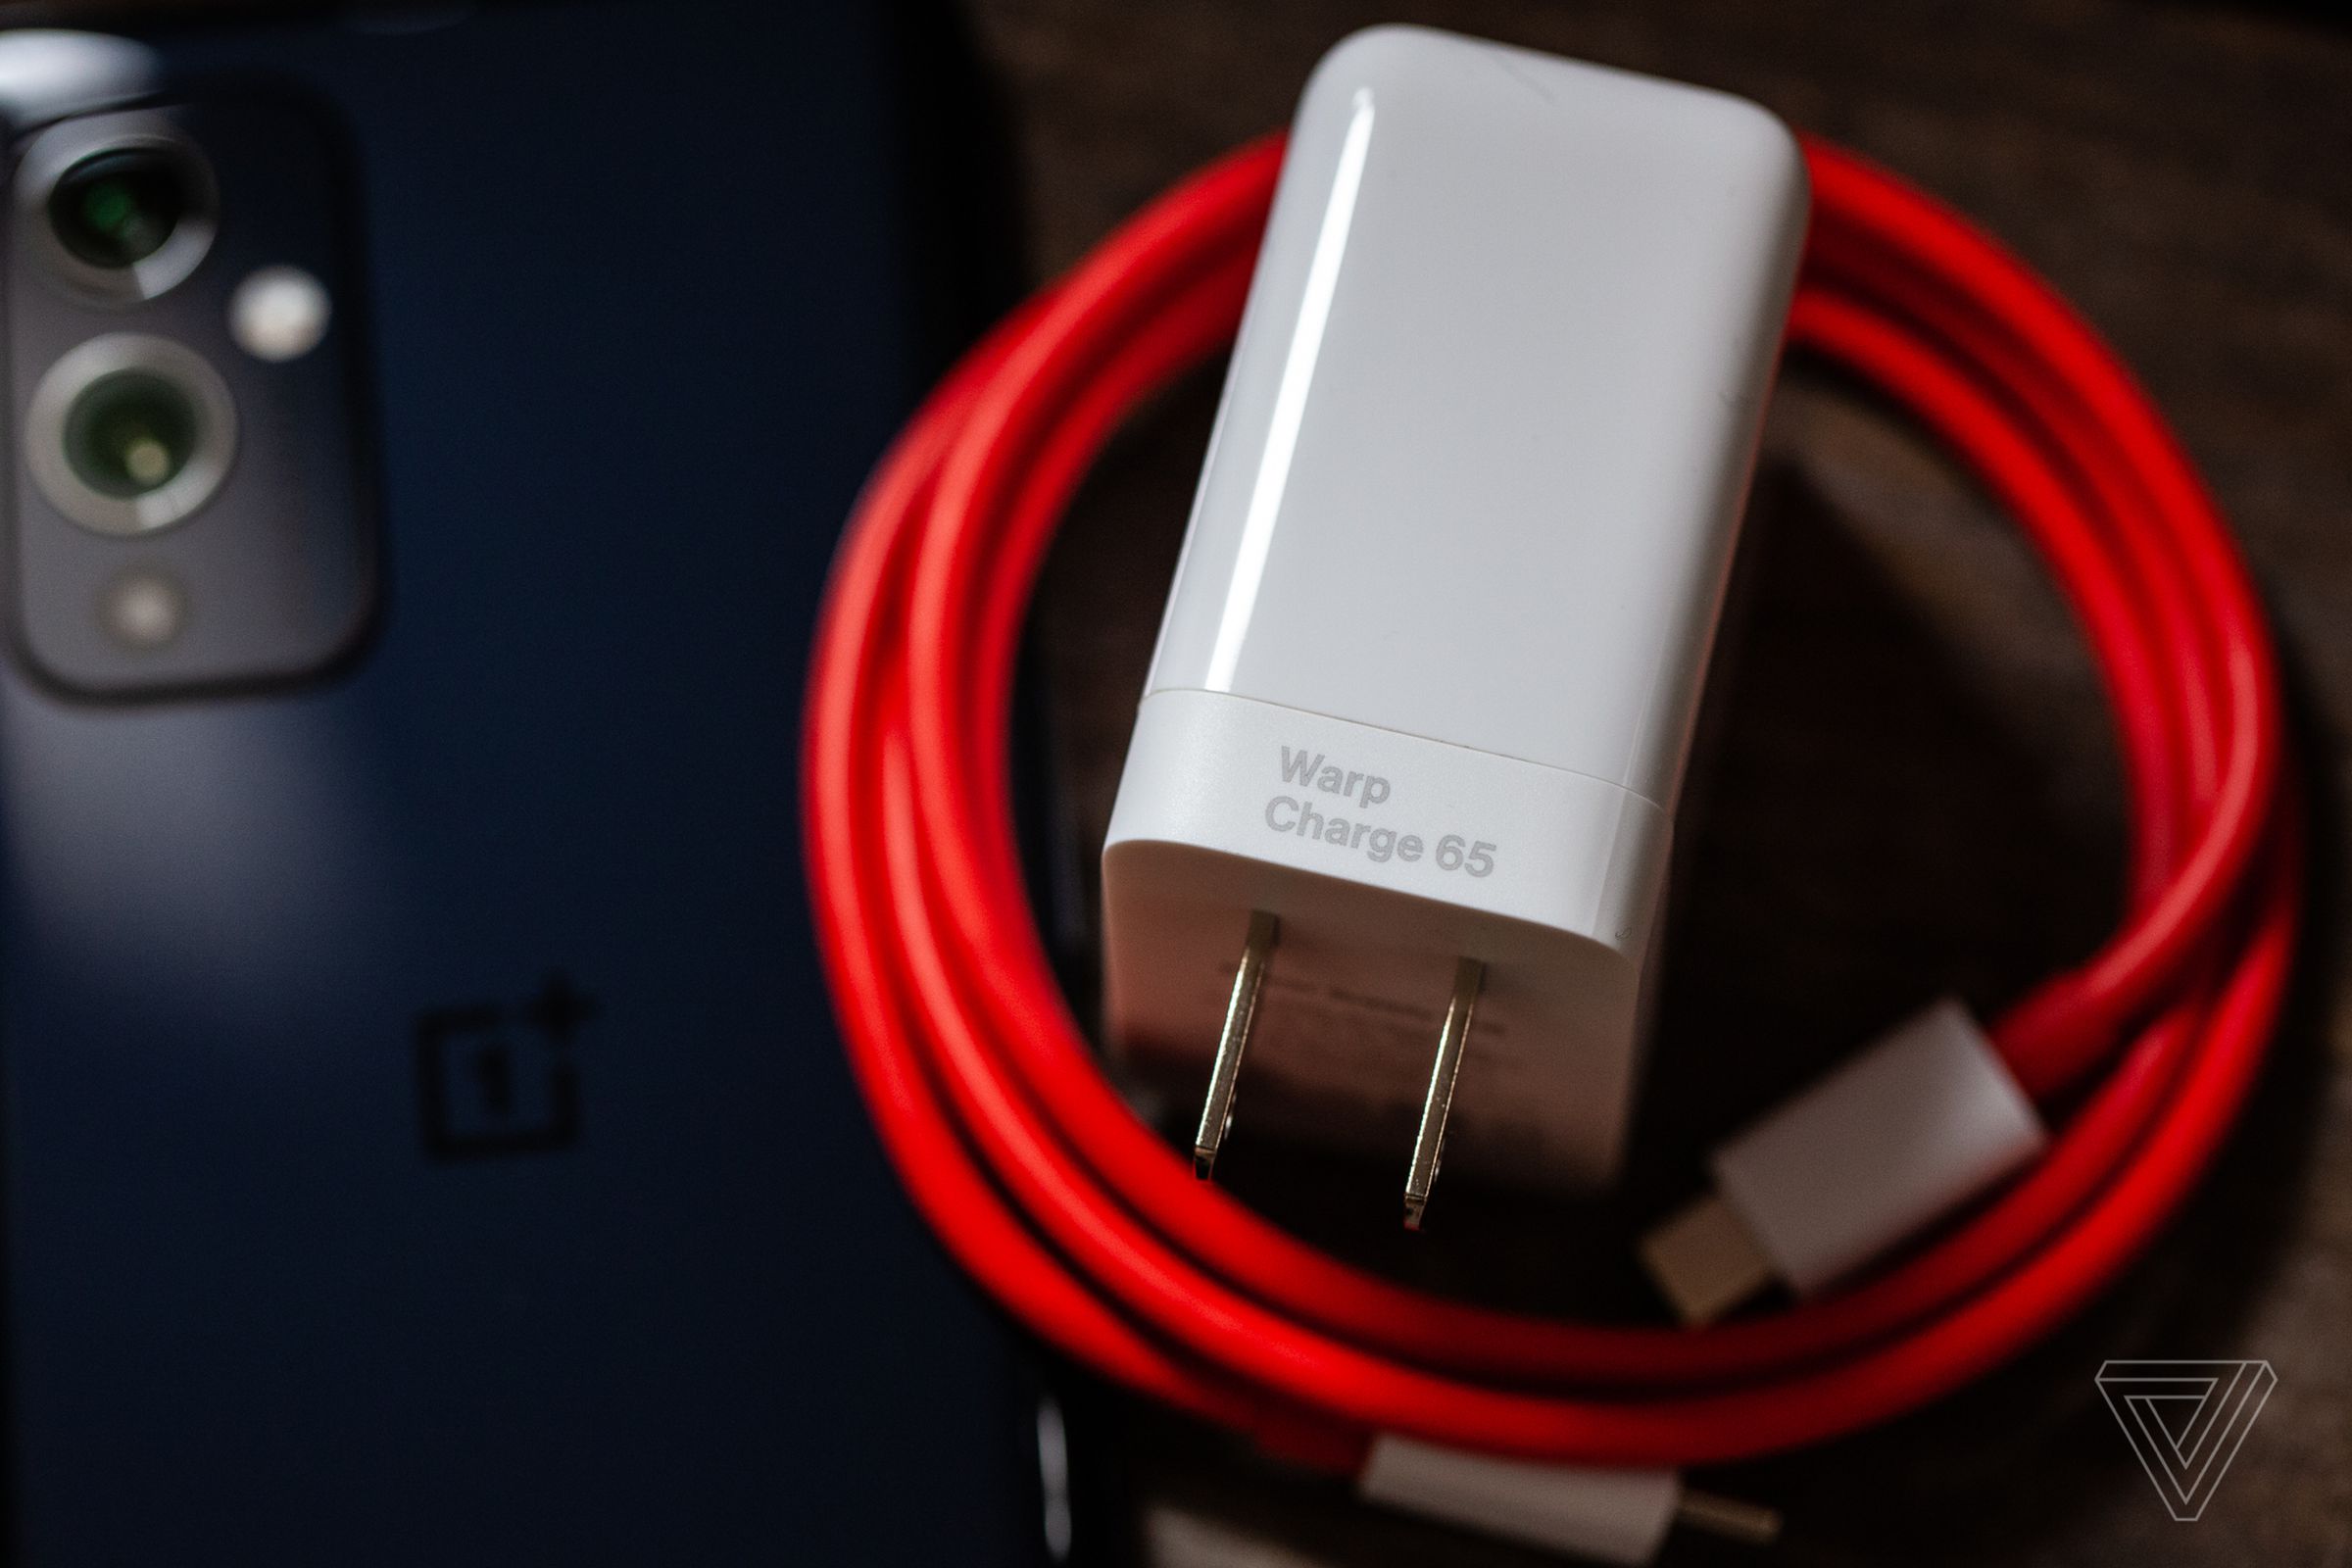 The 65W charger comes in the box (pictured with the regular OnePlus 9).